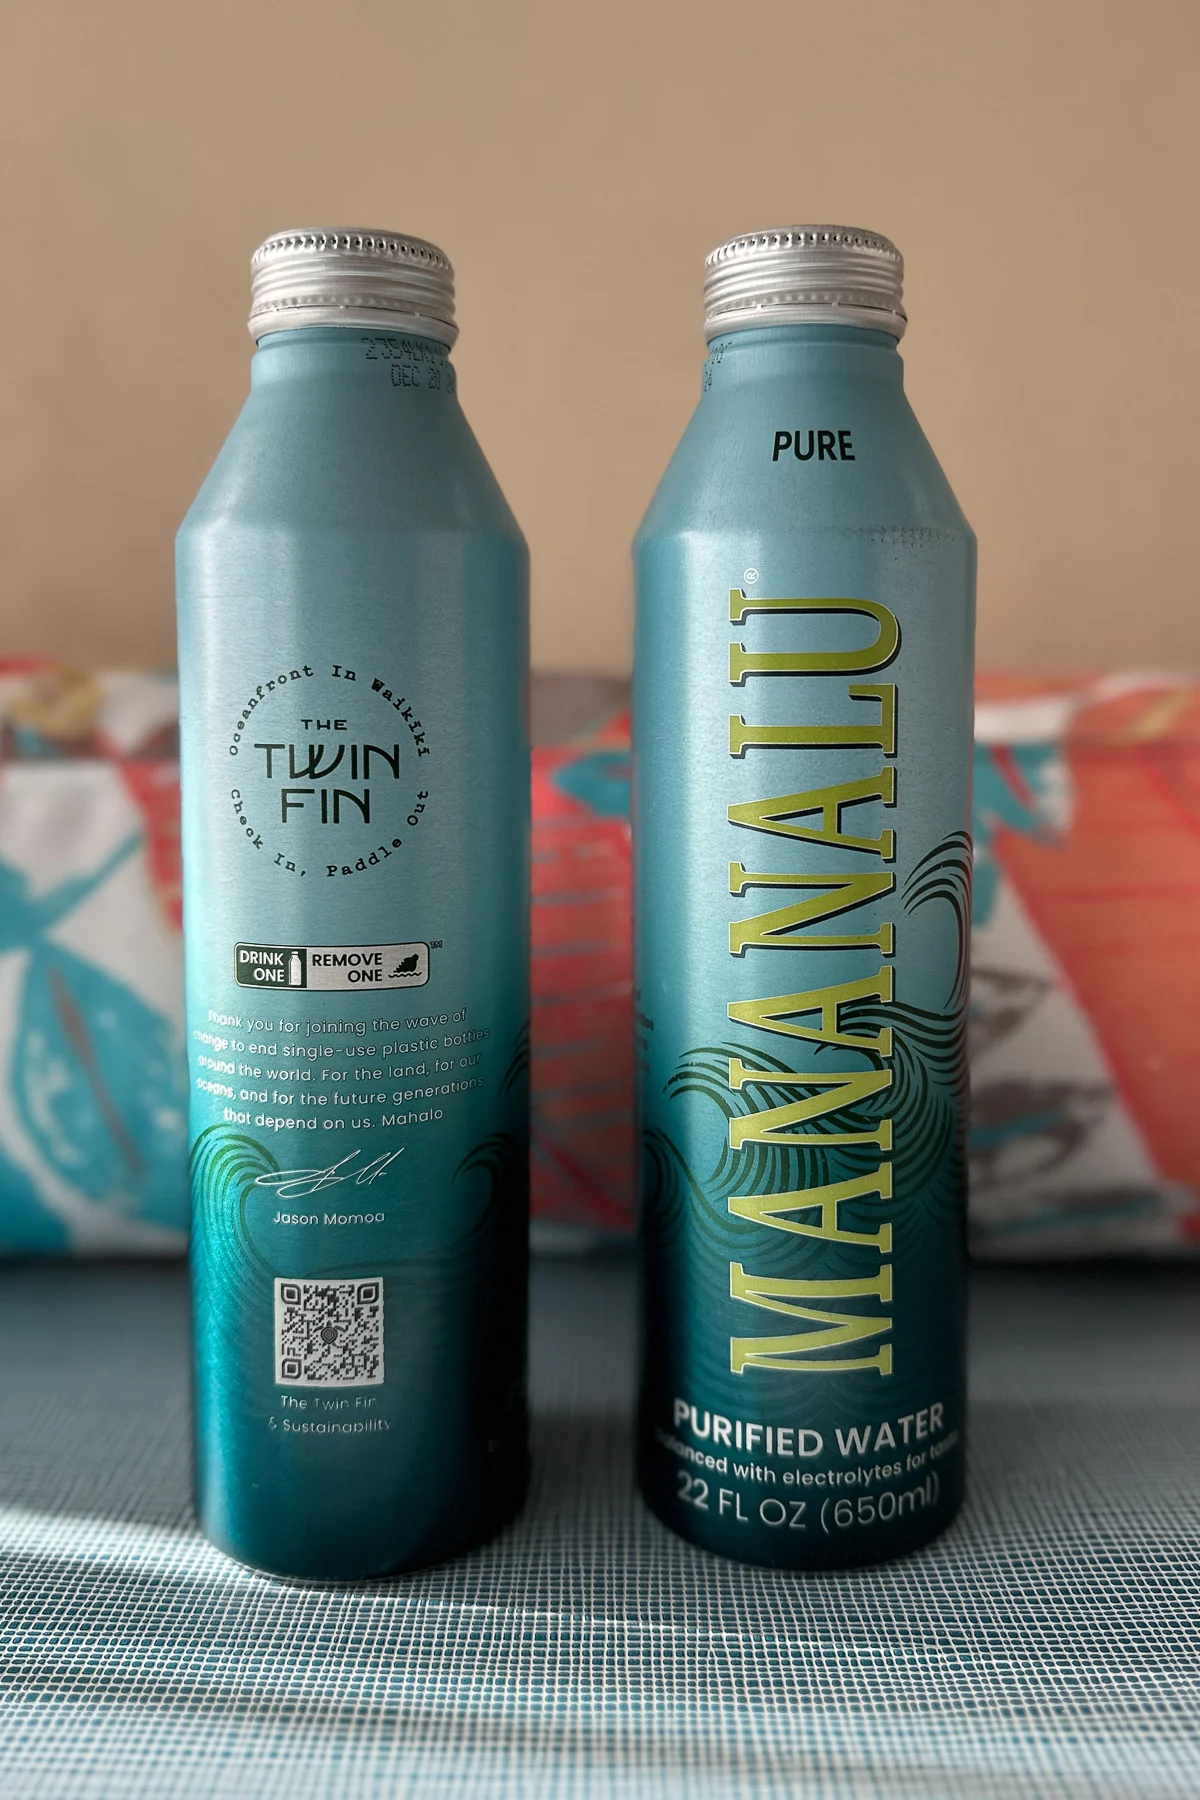 Reusable water bottles given at The Twin Fin Hotel.